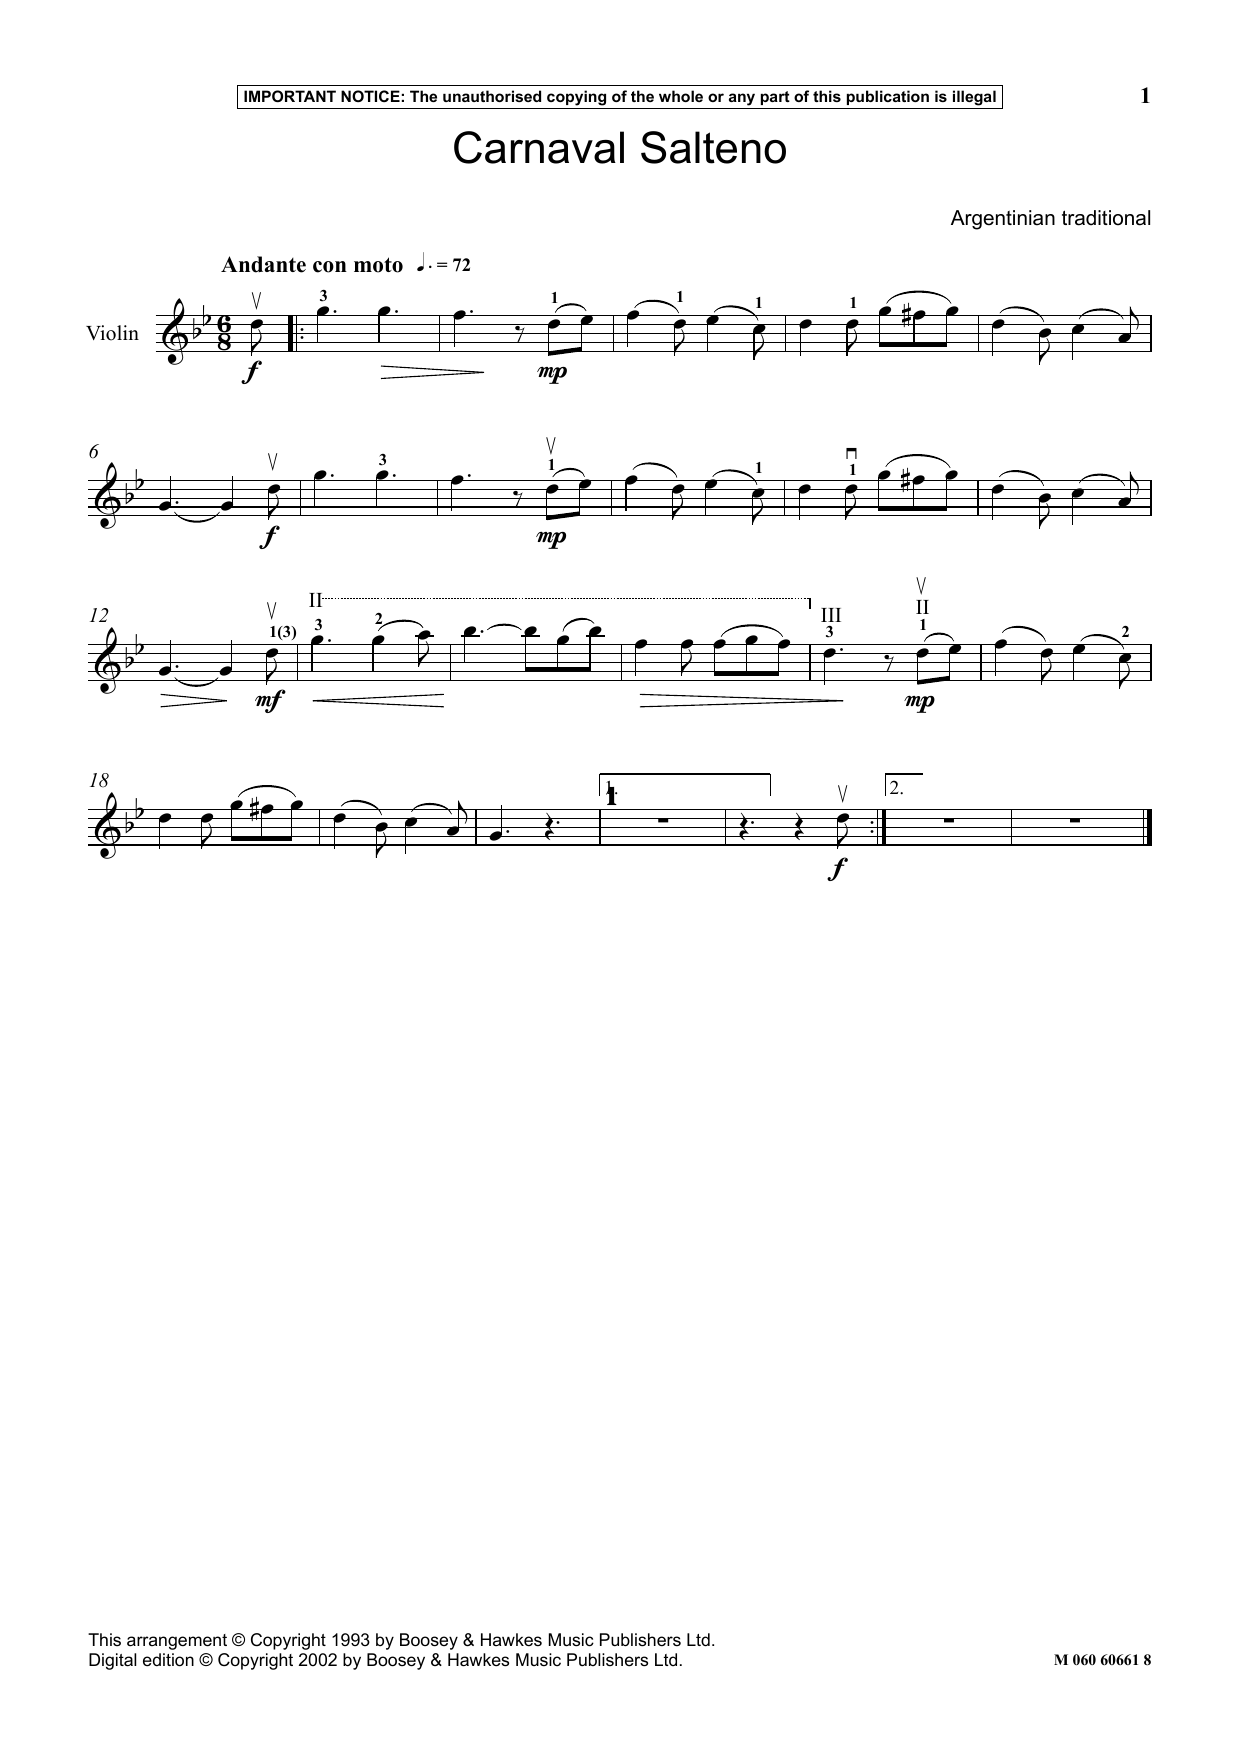 Download Argentinian Traditional Carnaval Salteno Sheet Music